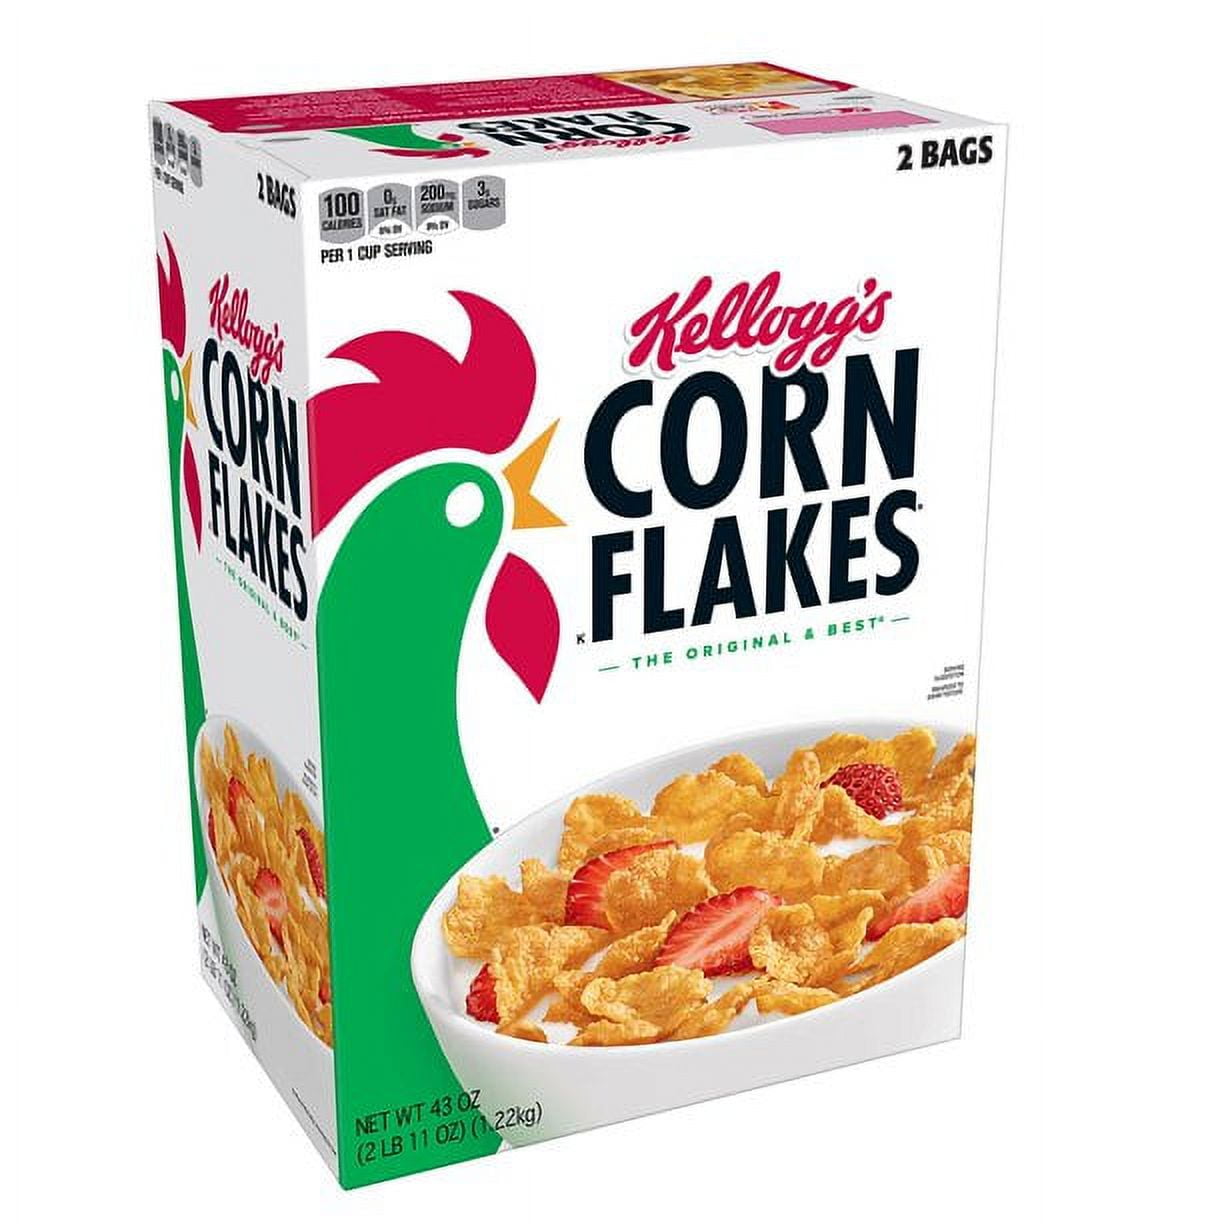 Kellogg's unveils chocolate Corn Flakes spin-off